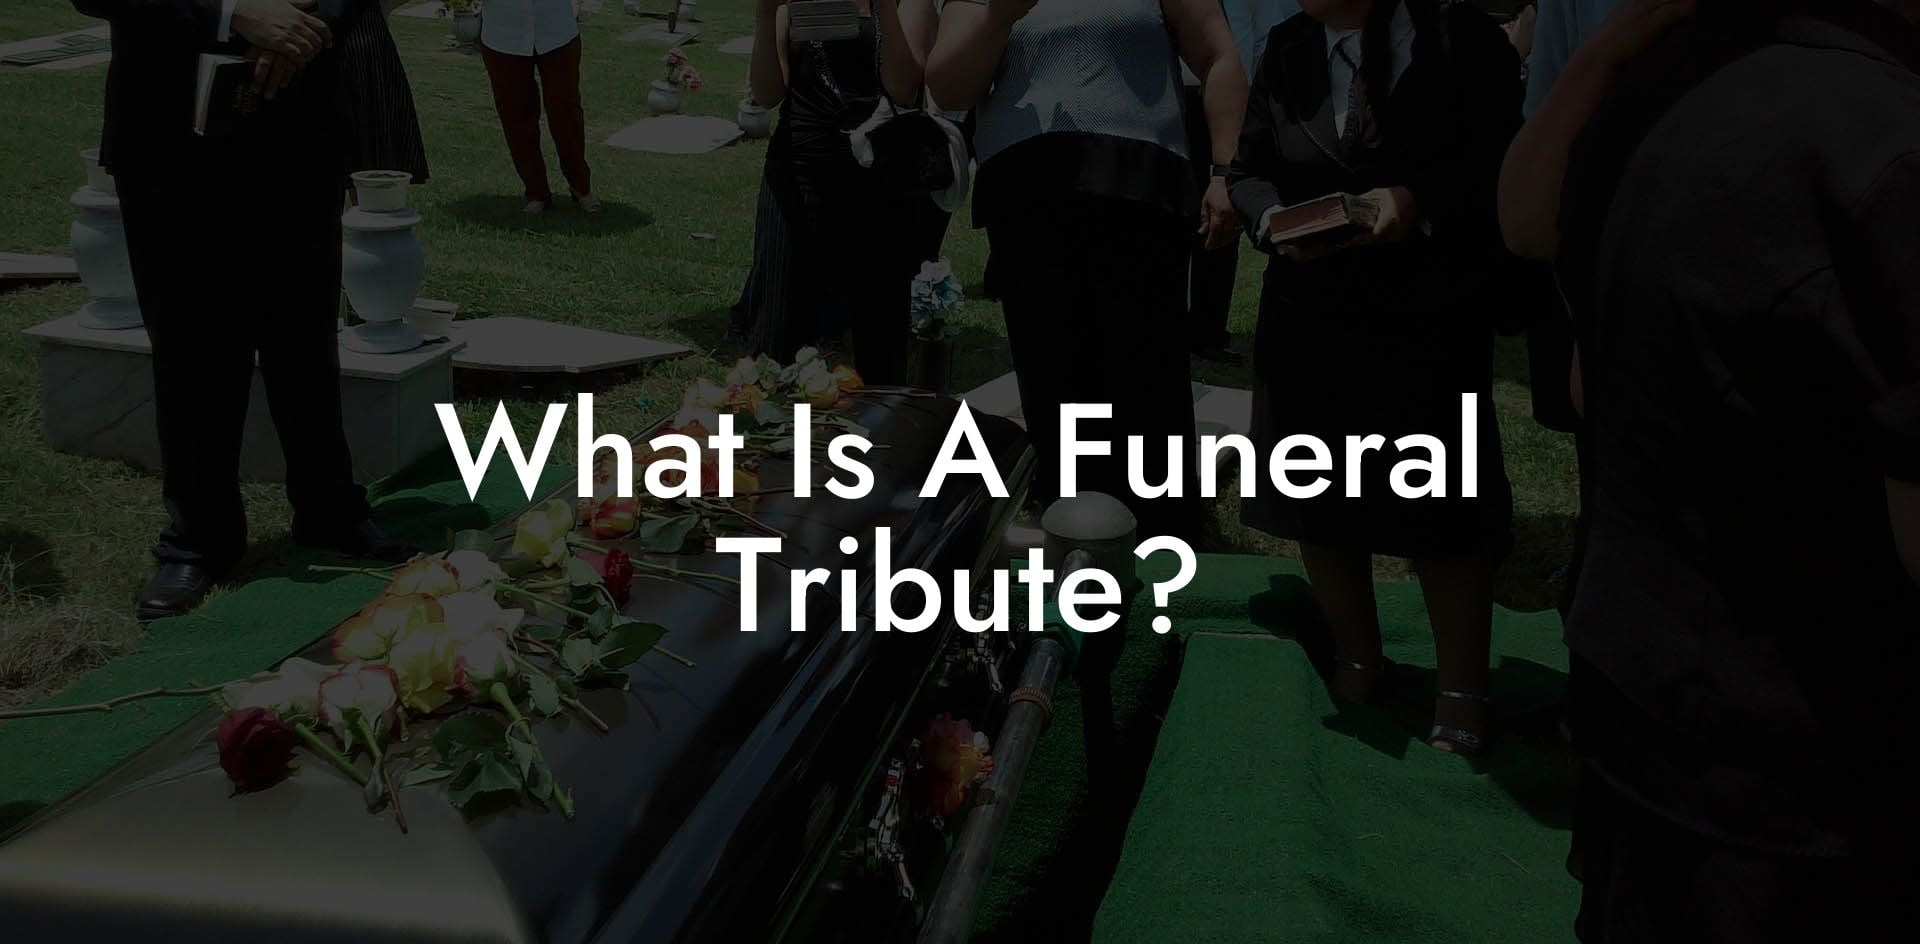 What Is A Funeral Tribute?